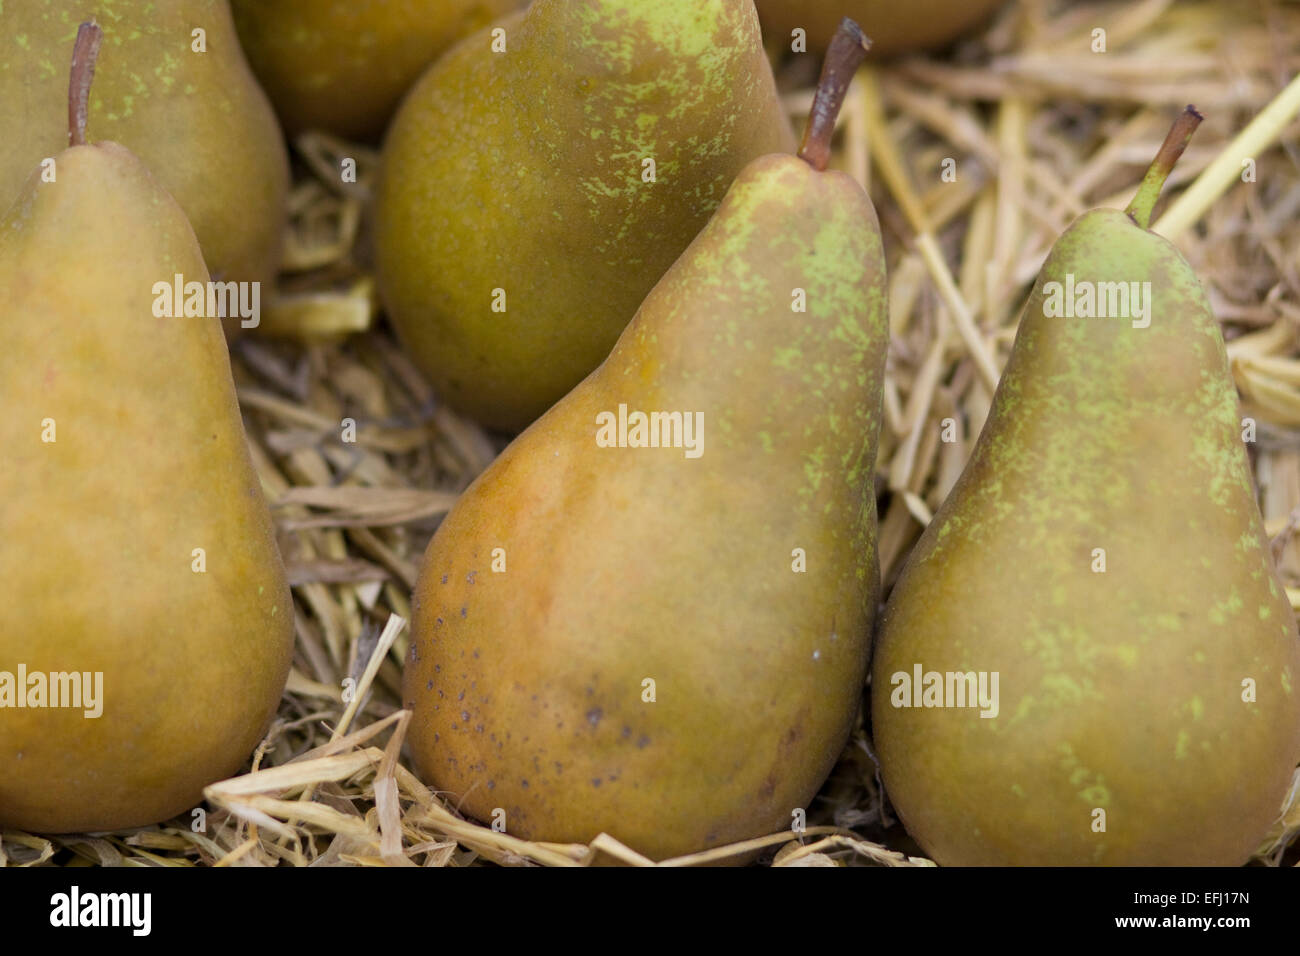 Pears in a straw bed Stock Photo